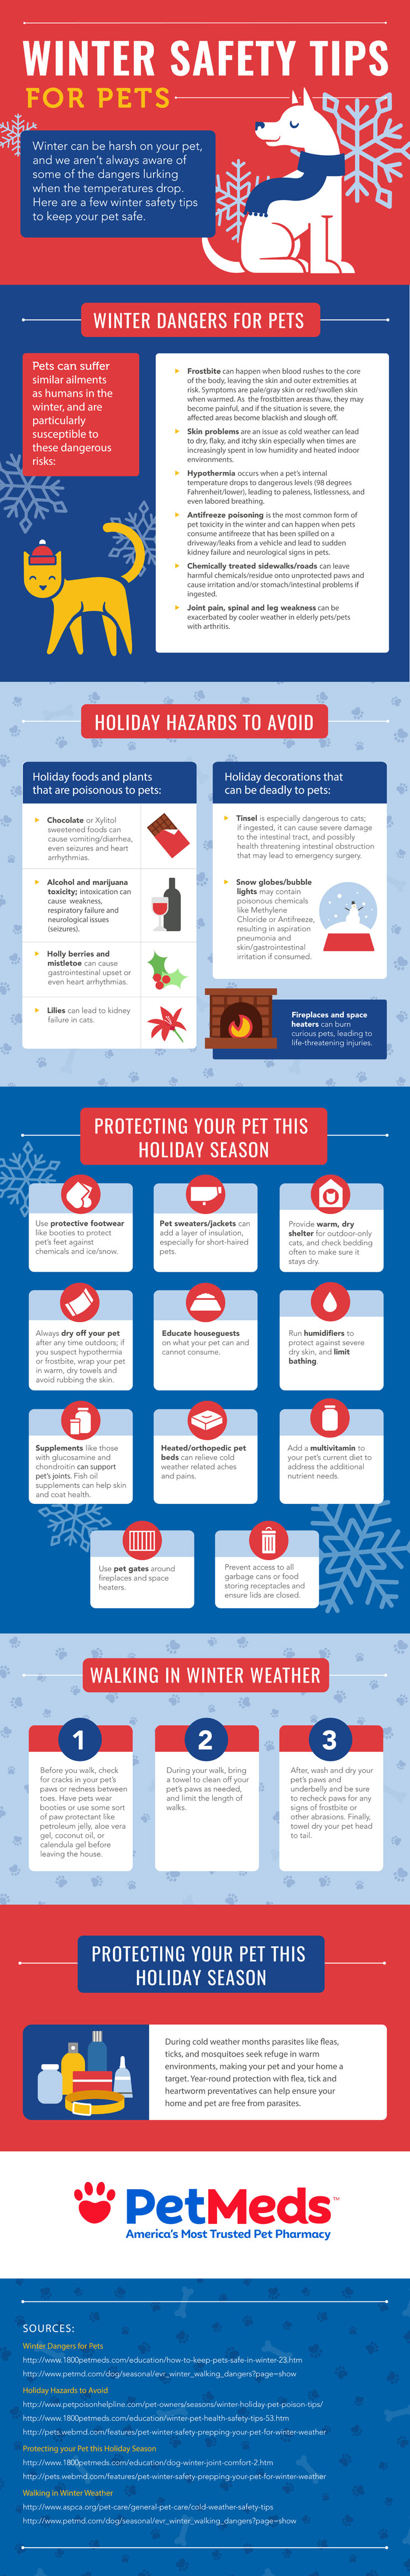 Click to Enlarge - Pet Safety During Holidays & Winter Weather Infographic